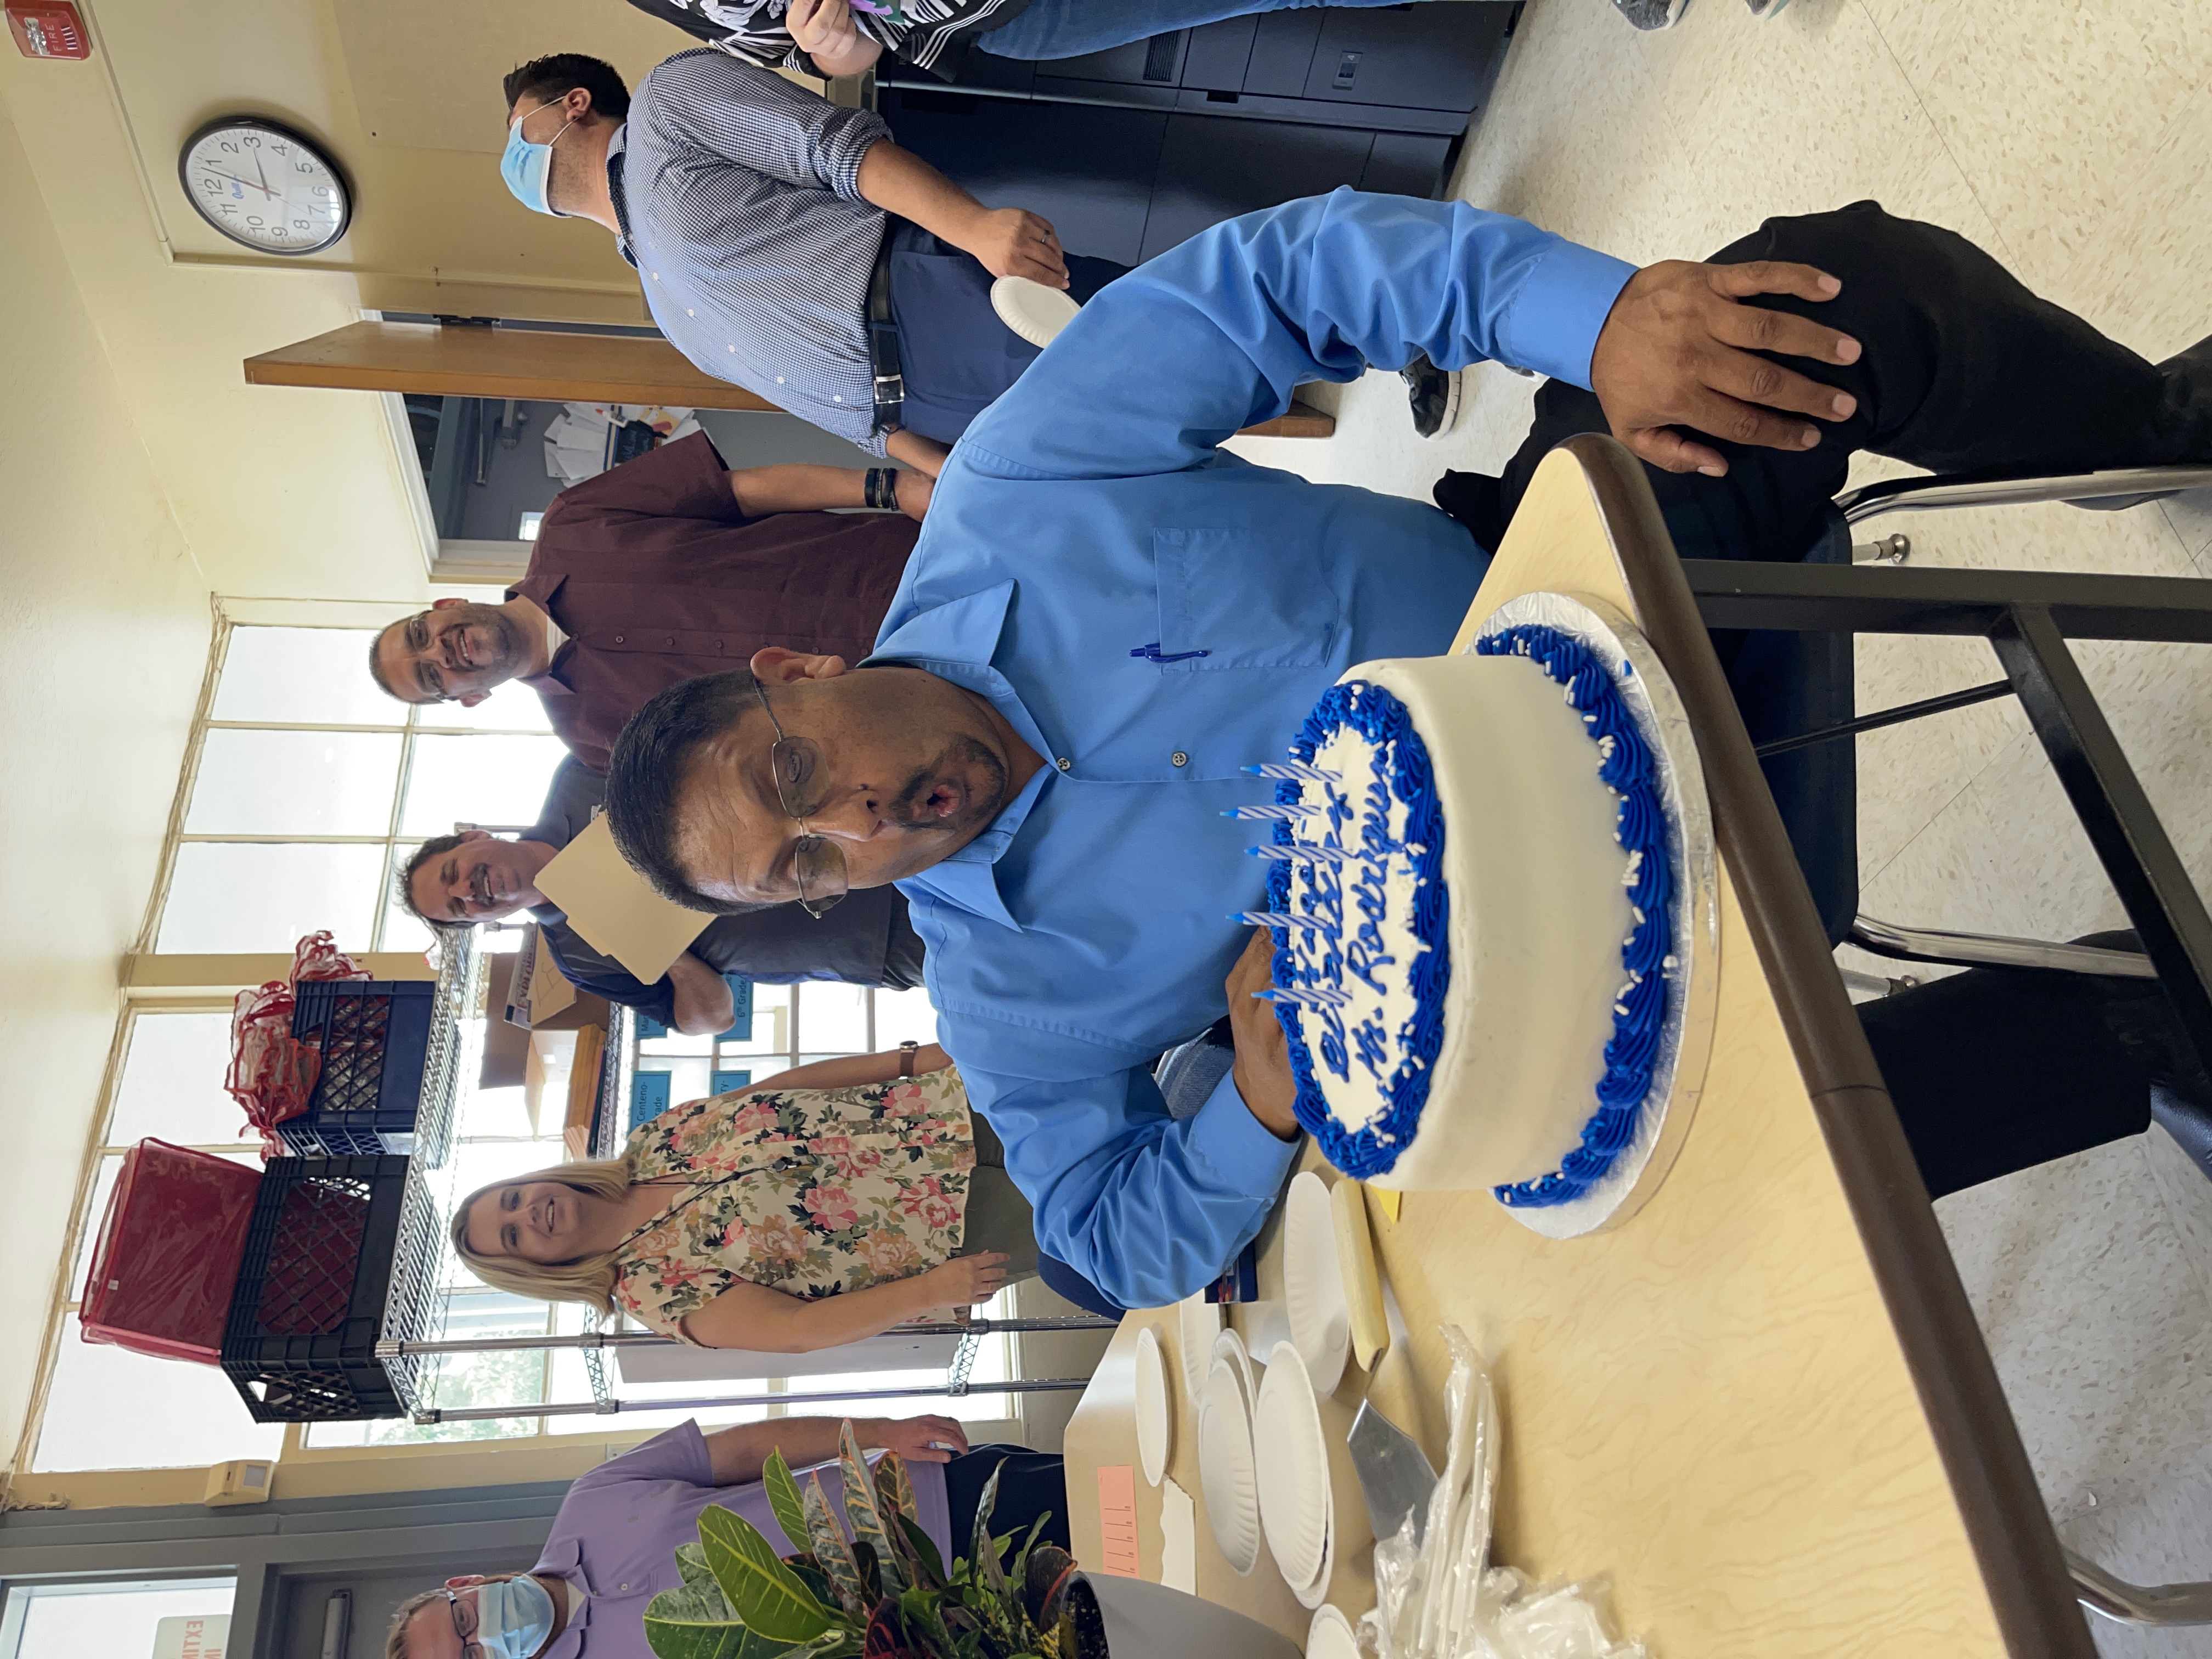 Mr. Isidro celebrates his birthday and blows out the candles on his cake.